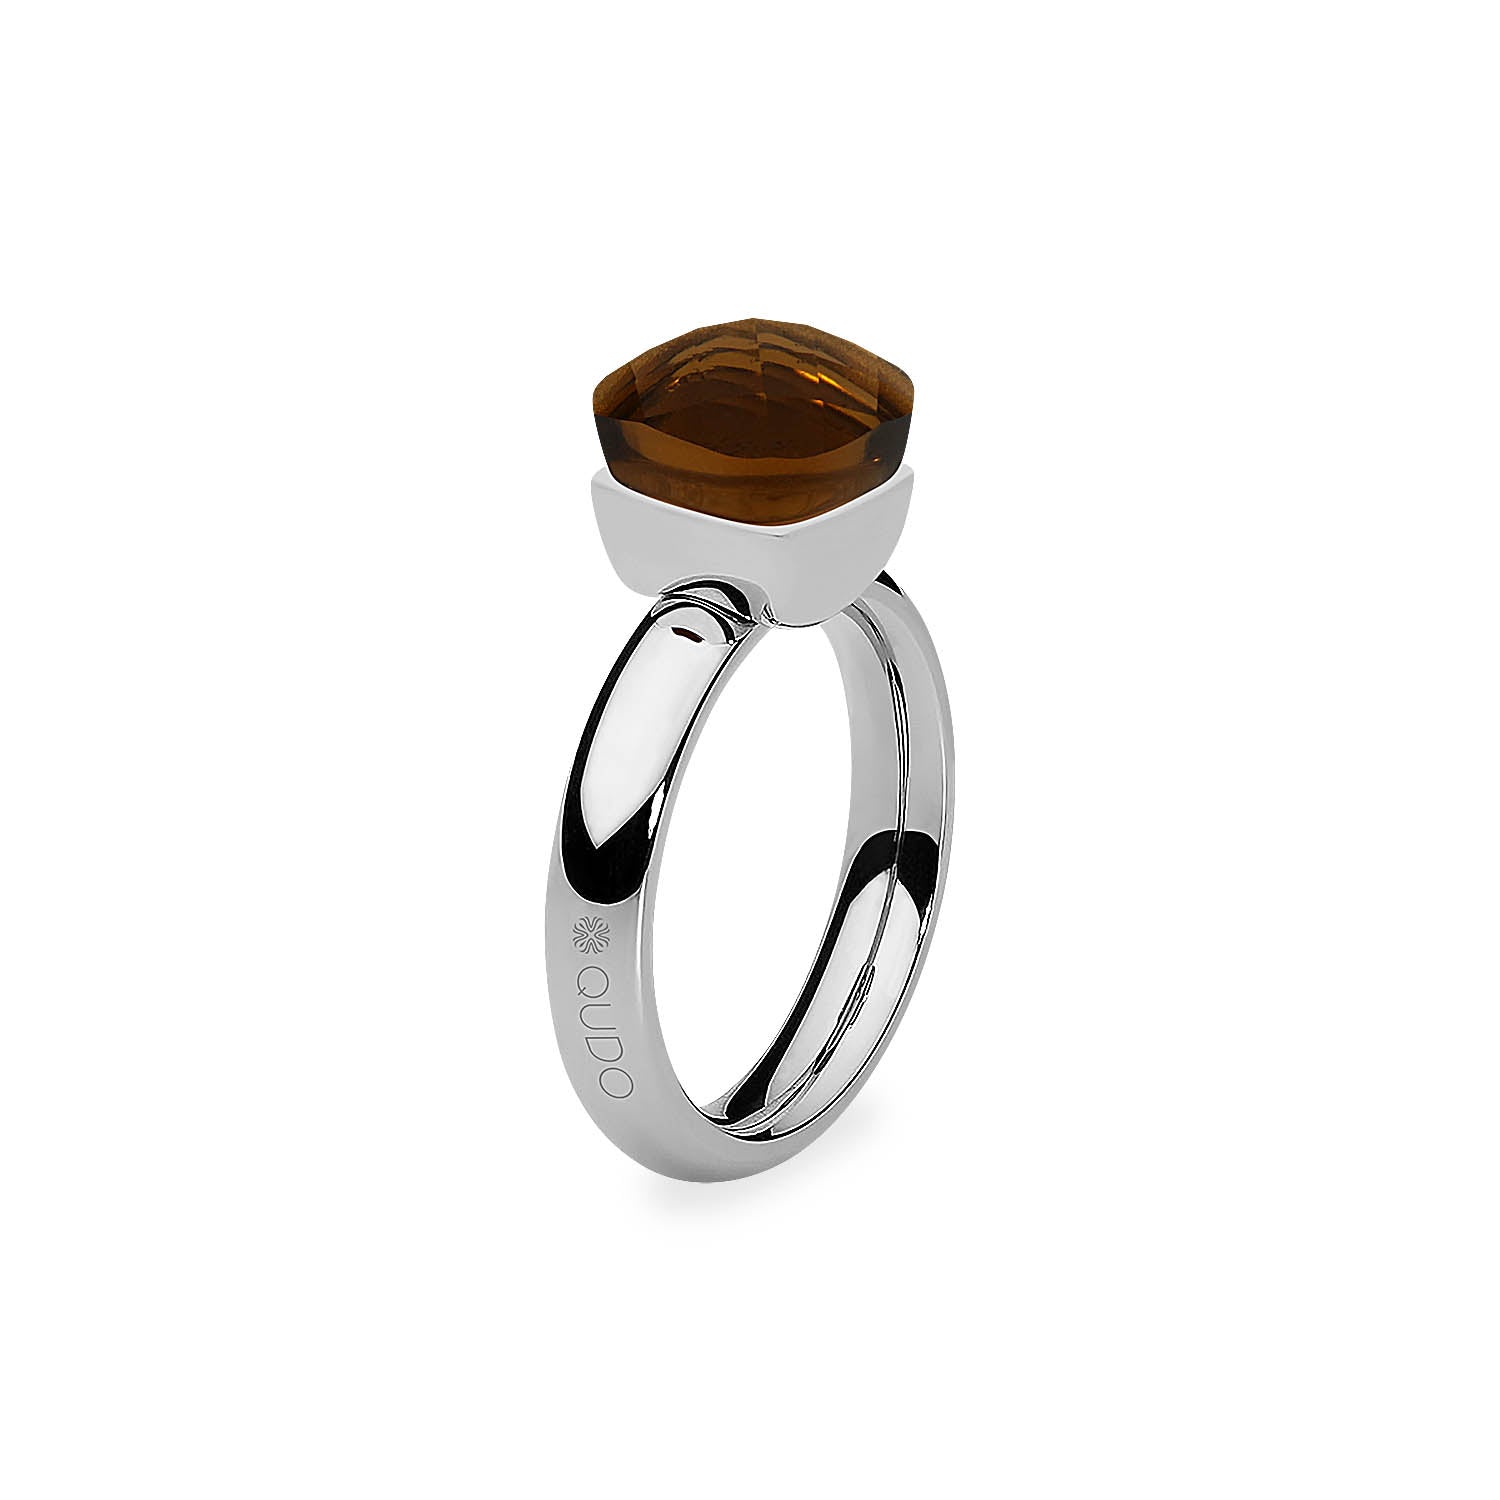 Firenze Ring - Shades of Green & Brown - Silver